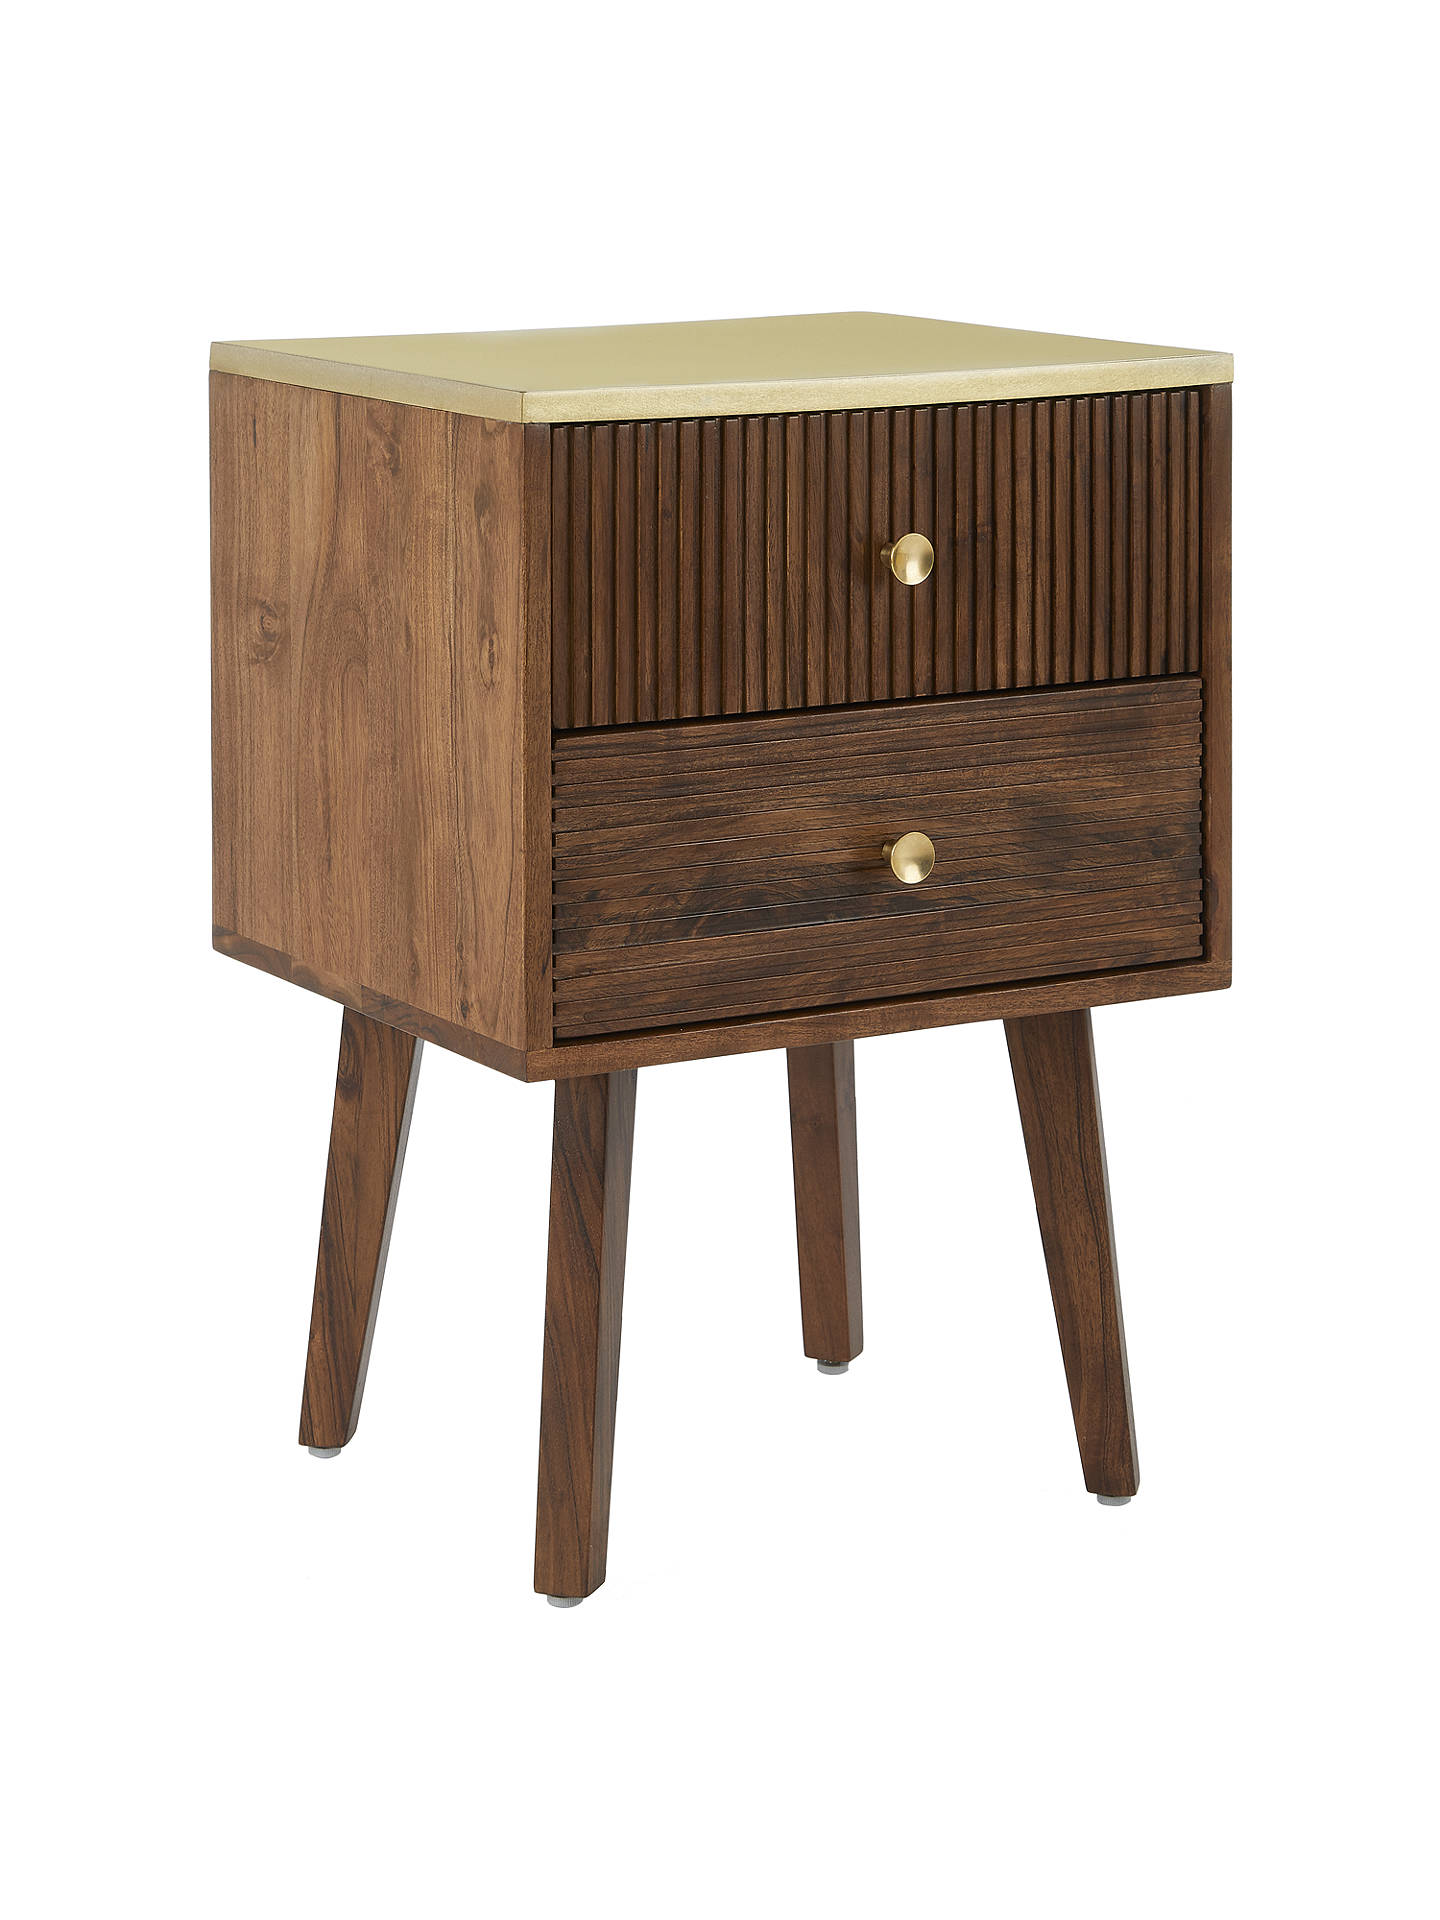 john lewis partners padma drawer bedside table brown wood accent johnlewis small cabinet kirklands clocks pod chair bunnings english side chest inch console marble cube ikea